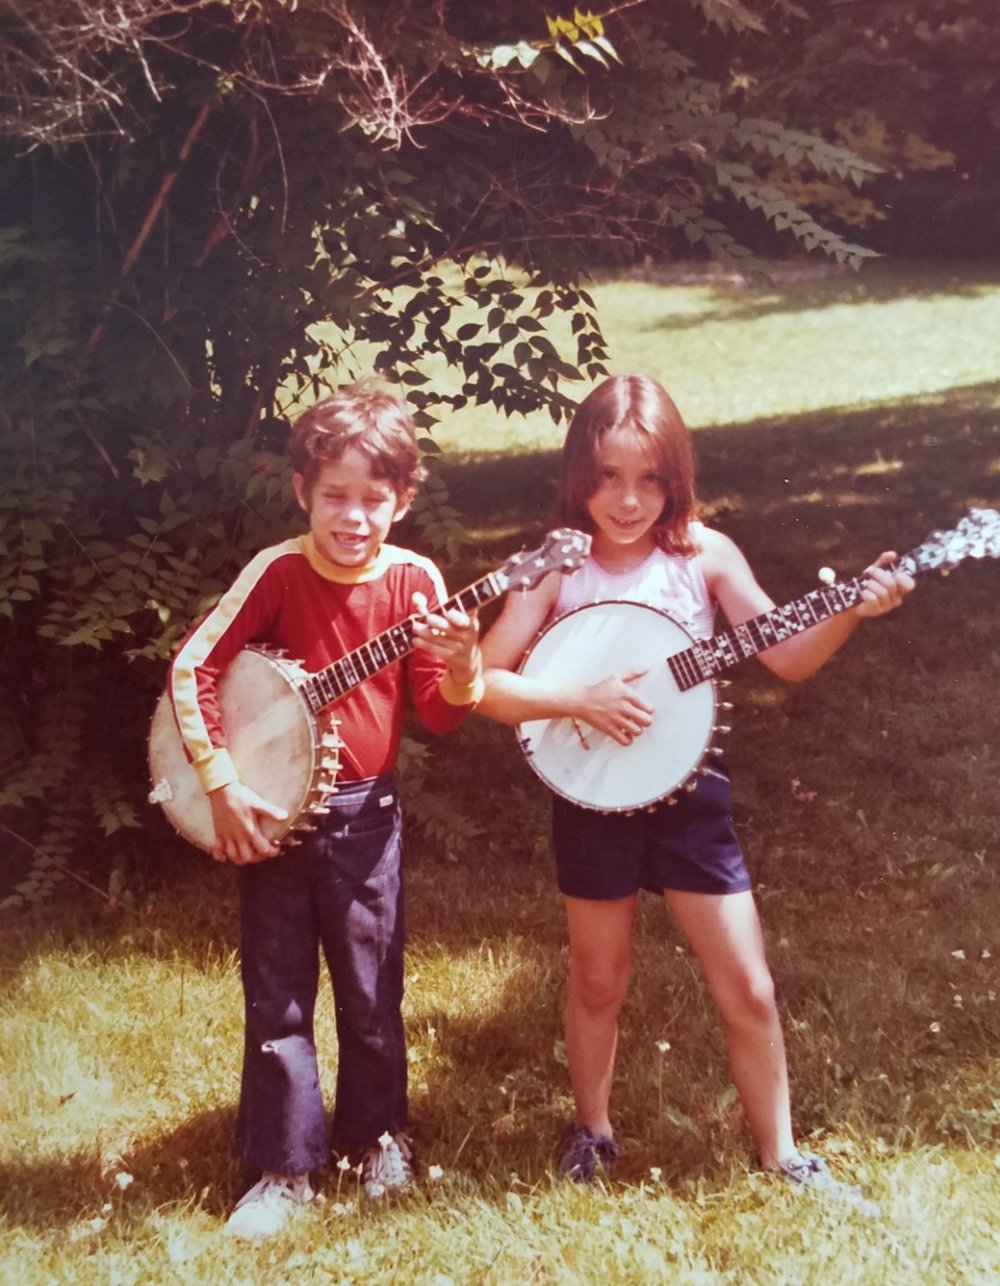 They were also models for other fancy banjos that I was selling.